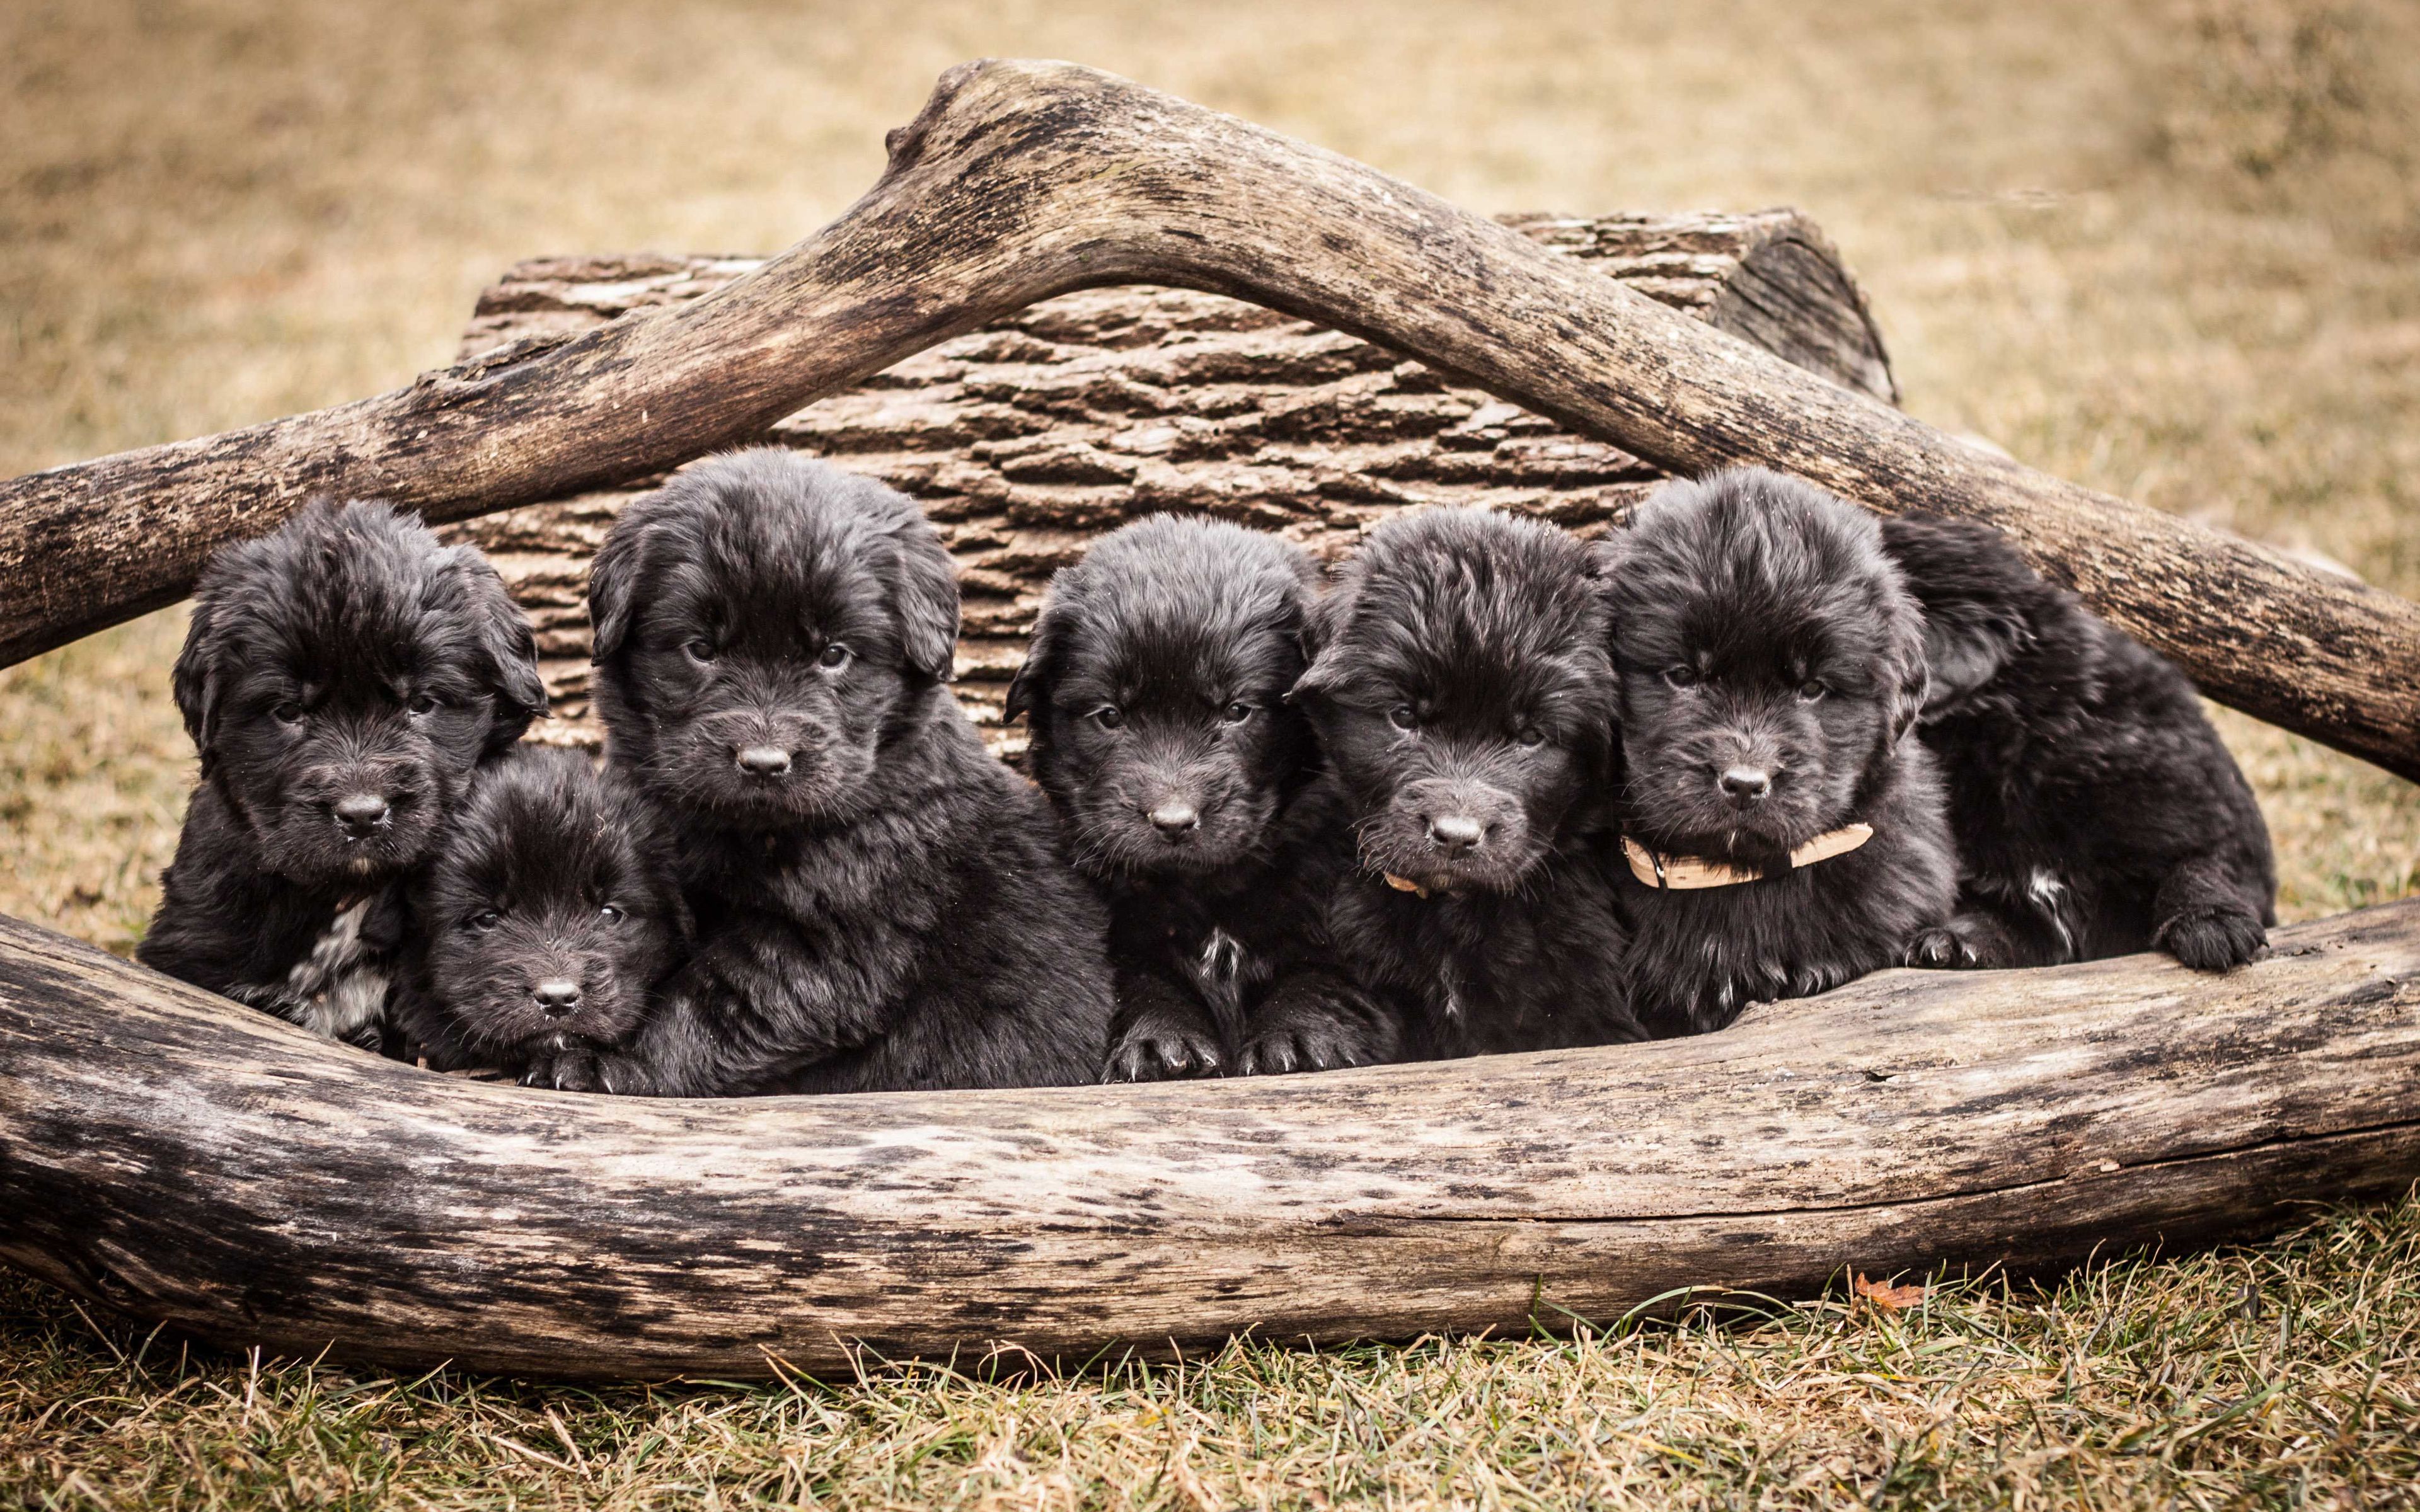 Download wallpaper 4k, Newfoundland, puppies, dogs, funny animals, cute dog, pets for desktop with resolution 3840x2400. High Quality HD picture wallpaper